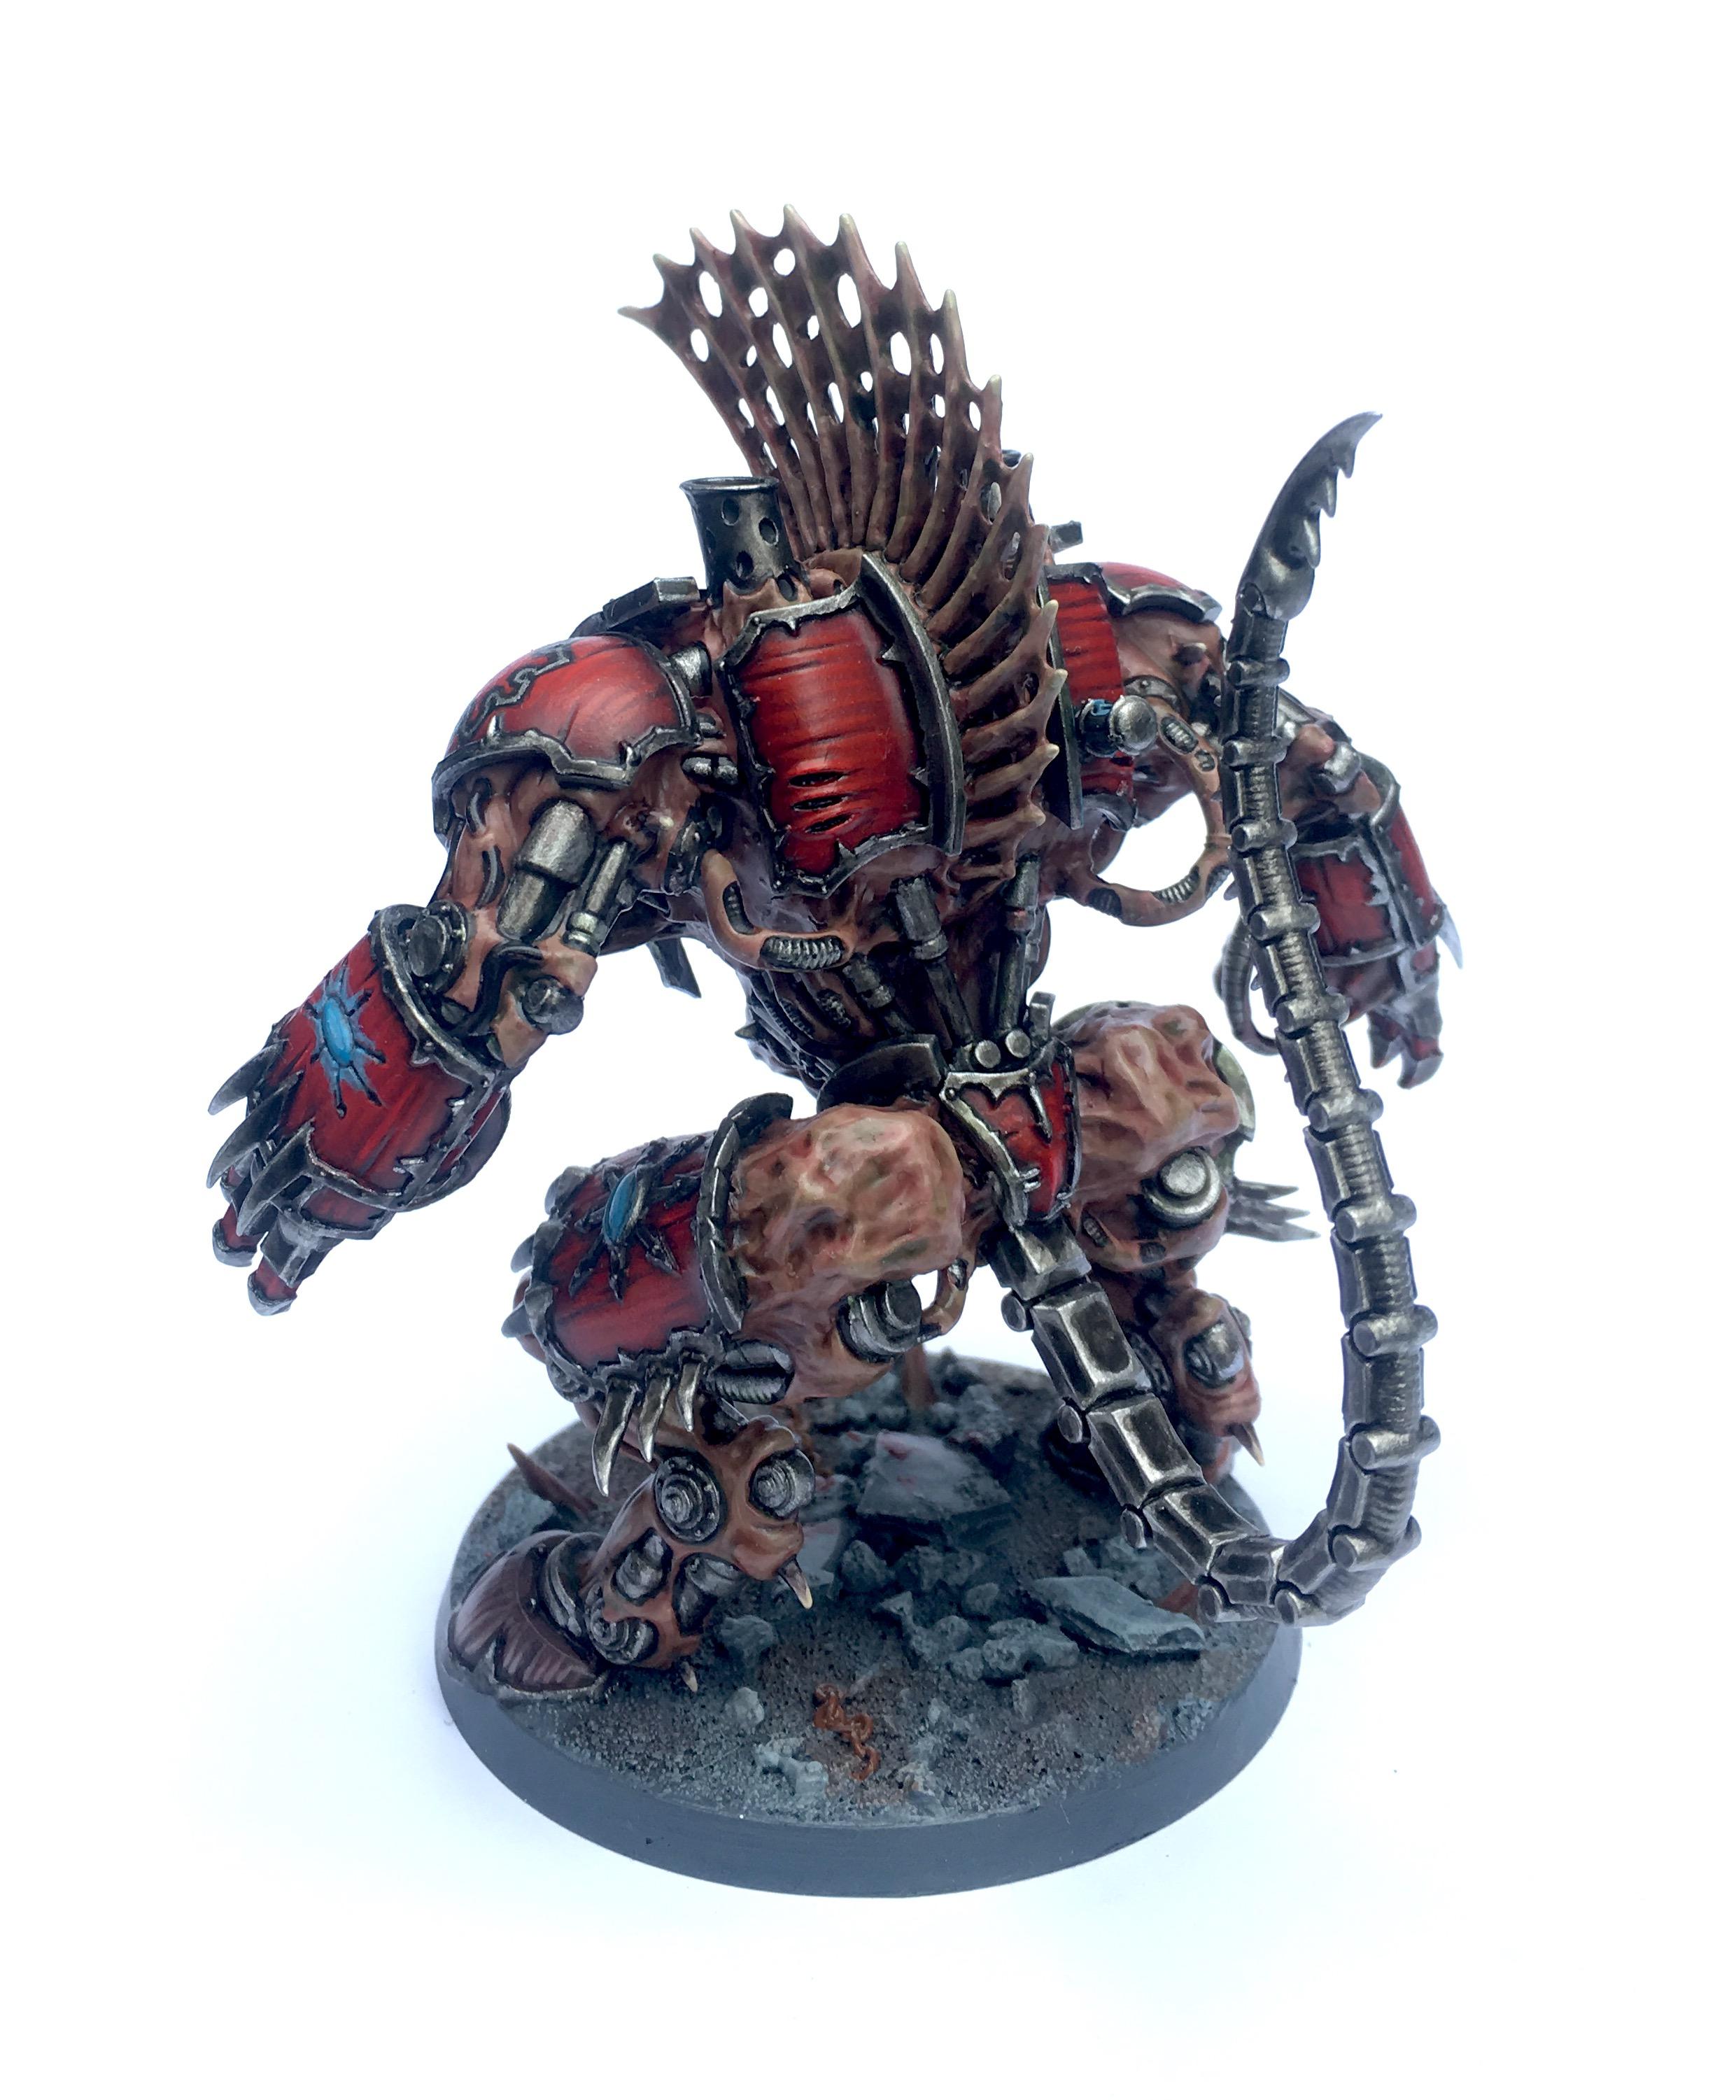 Chaos, Chaos Space Marines, Conversion, Daemon Prince, Helbrute, Horuswasright, Word Bearers